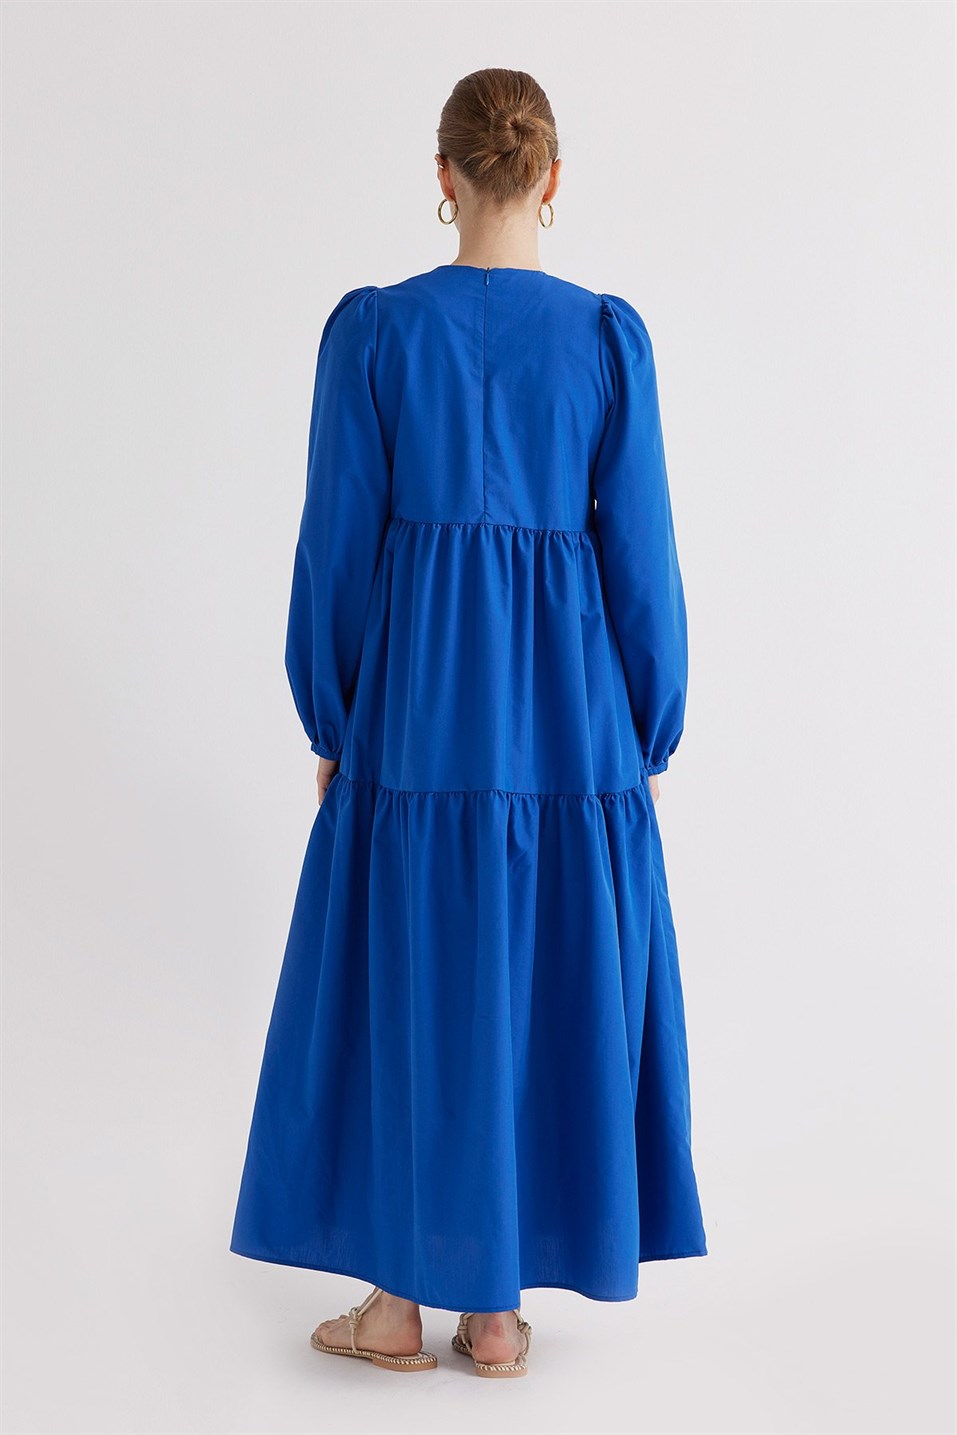 Blue Pleated Balloon Sleeve Cotton Dress | Suud Collection